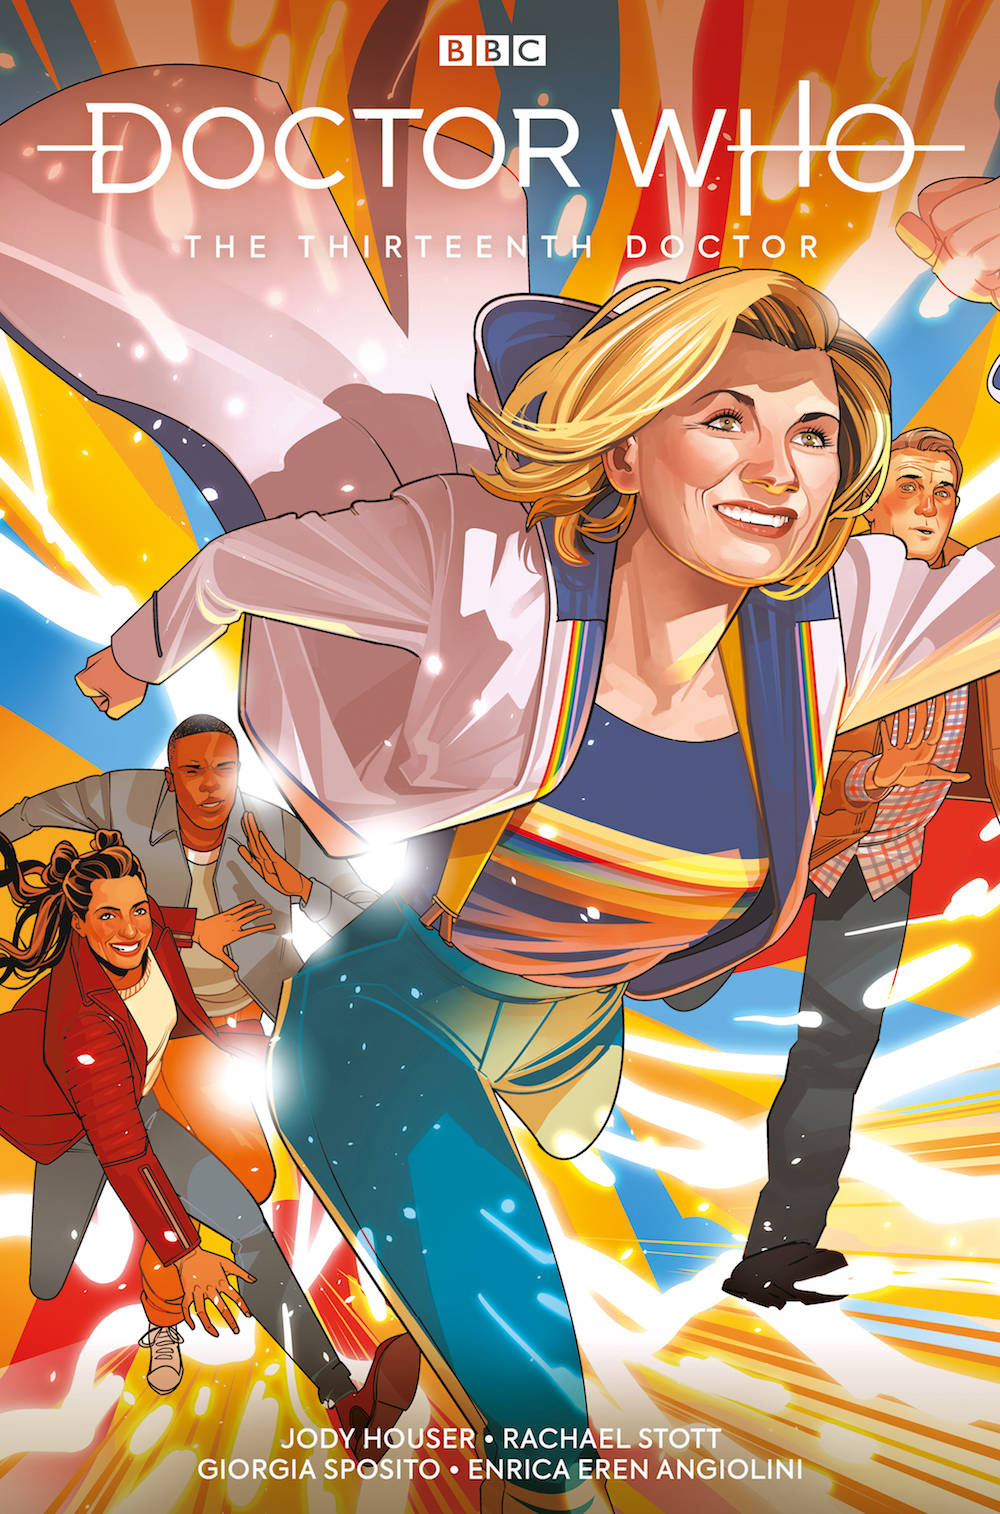 Doctor Who vol 1: The Thirteenth Doctor - A New Beginning